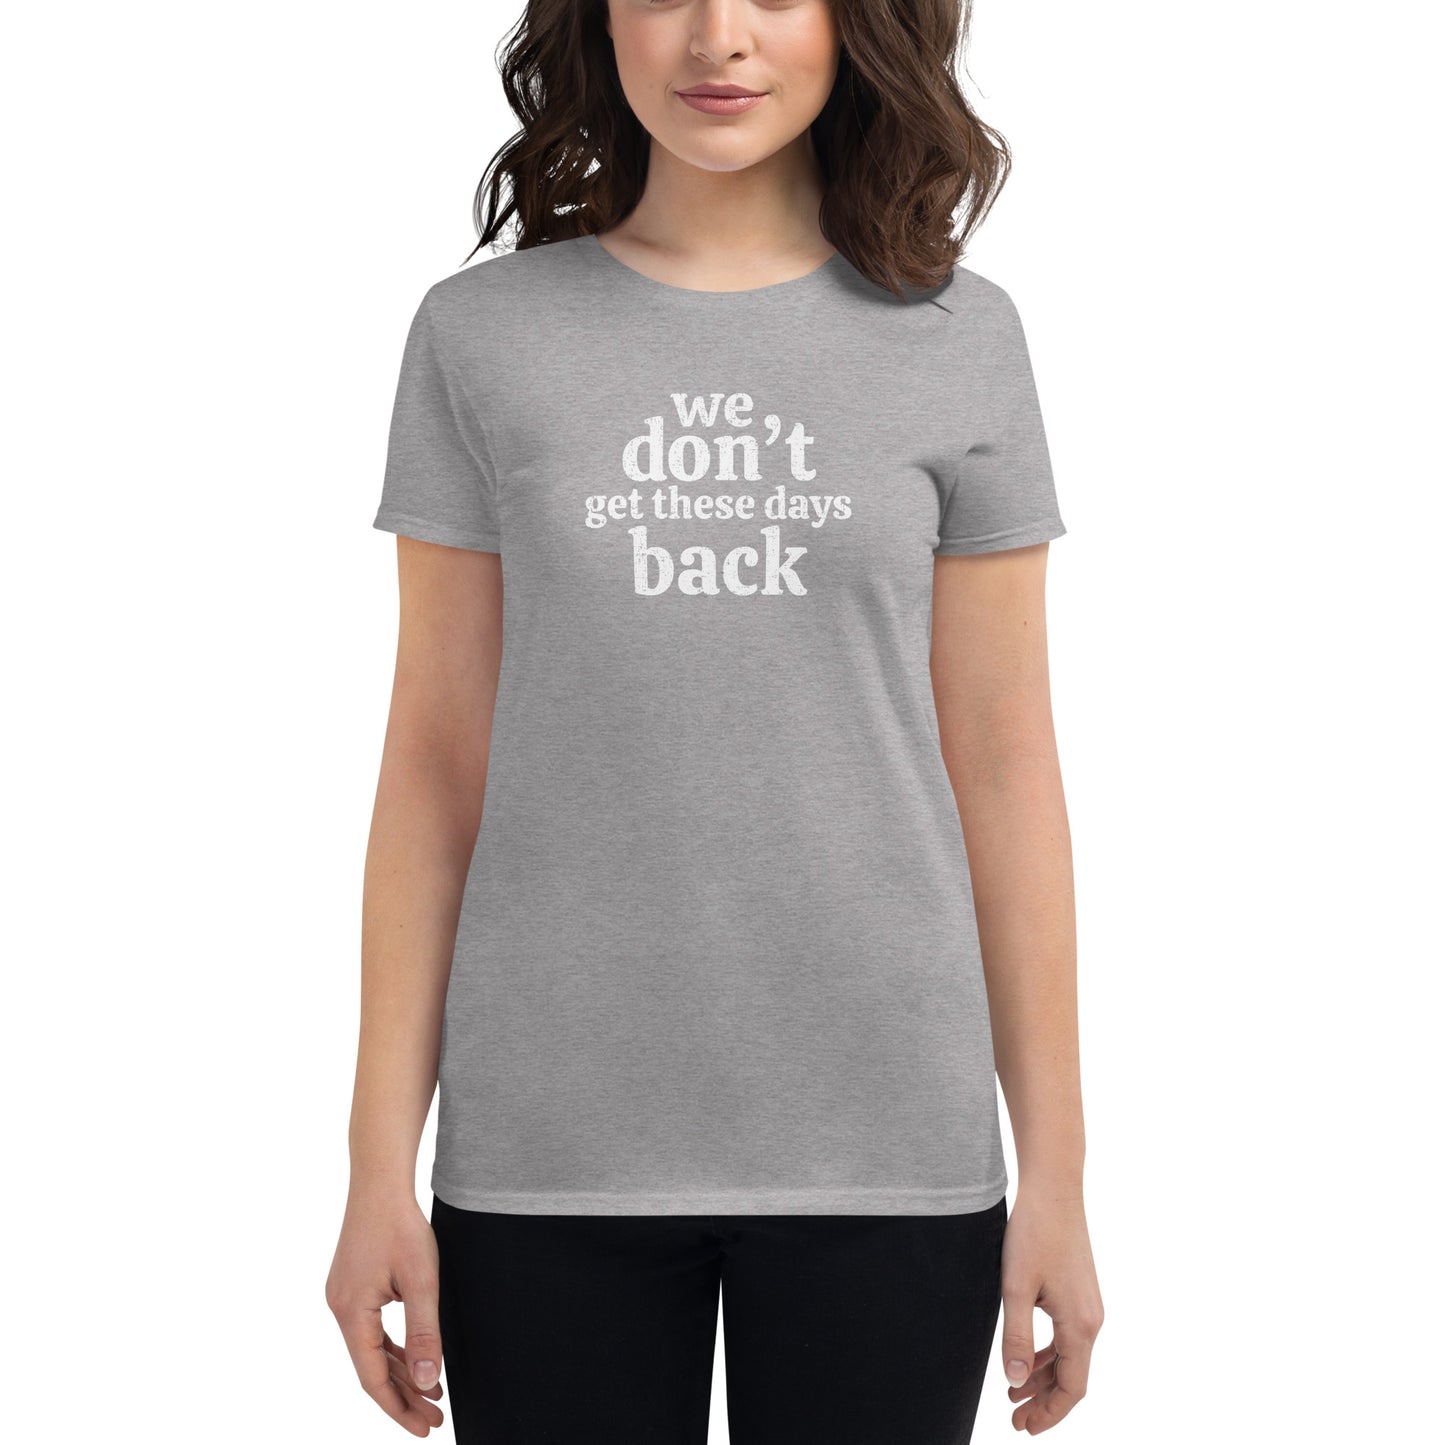 Women's Fashion Fit Tee - We Don't Get These Days Back